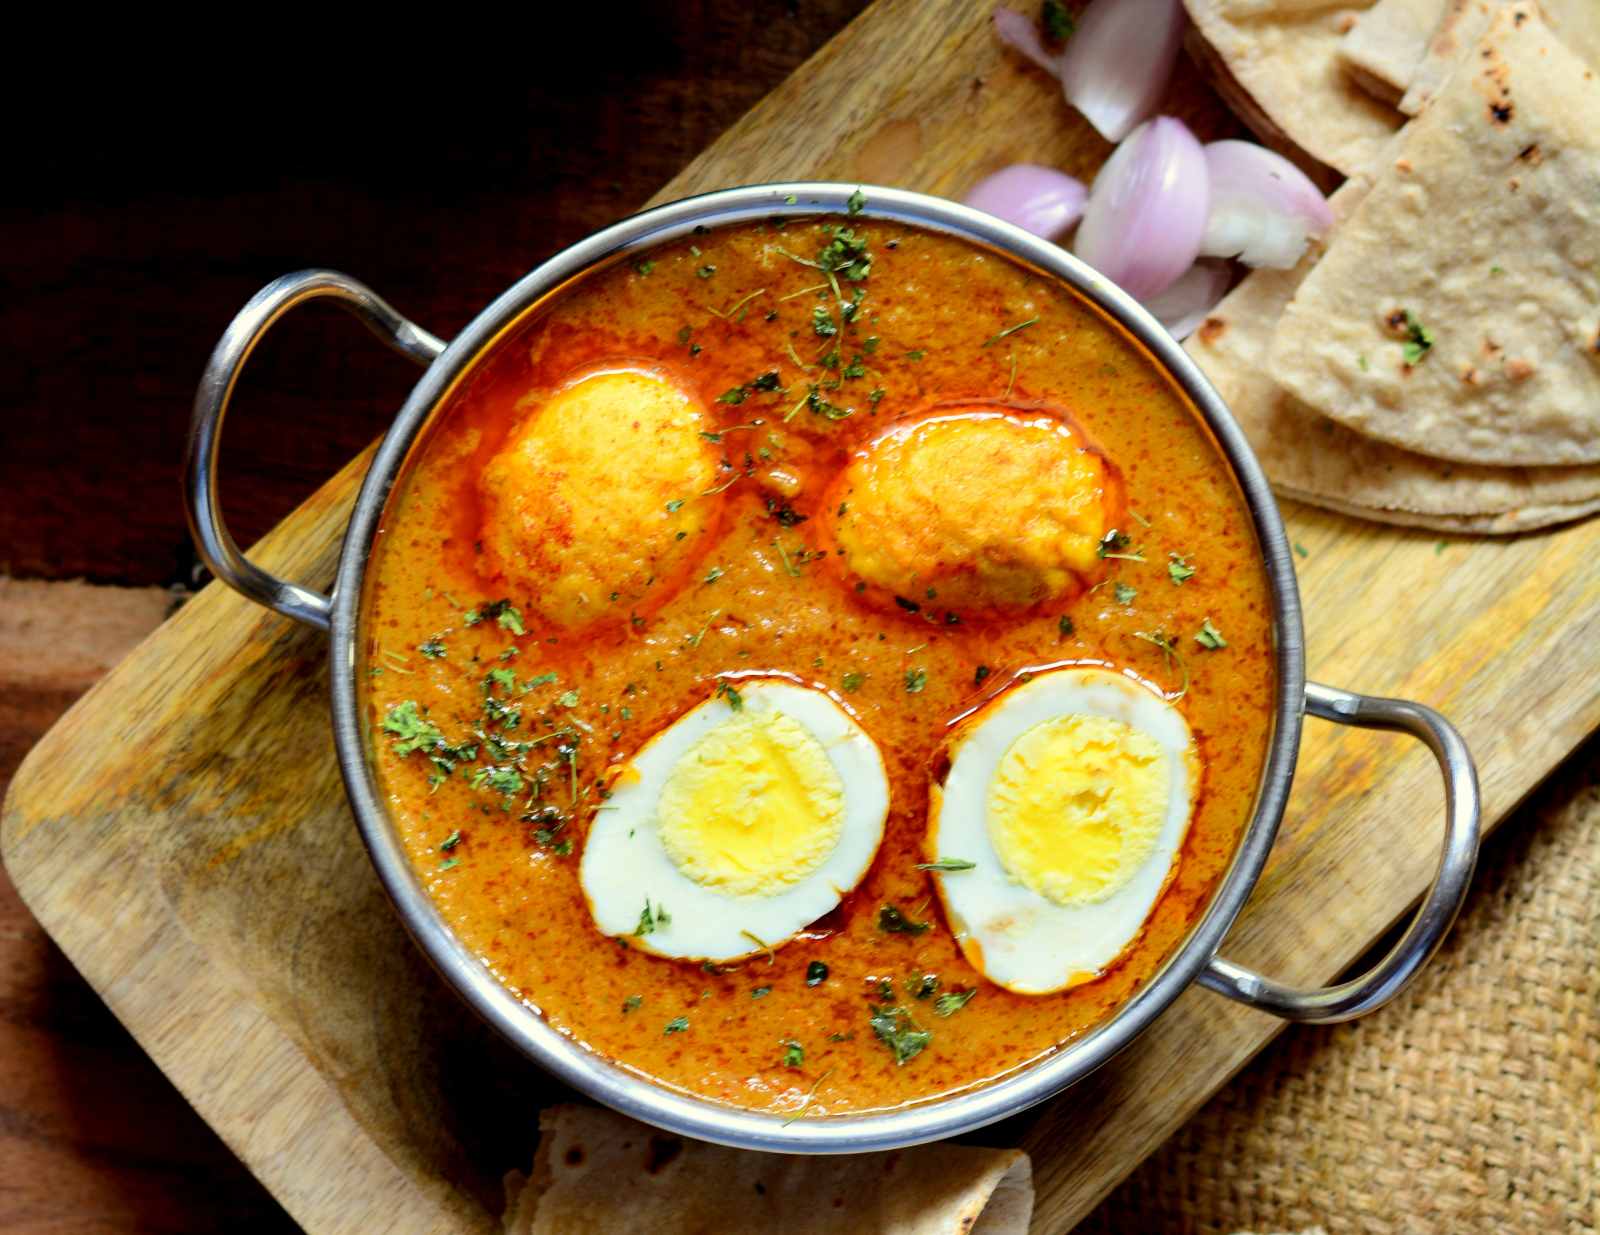 Dimer Malai Curry Recipe (Bengali Style Egg Curry In Coconut Milk)